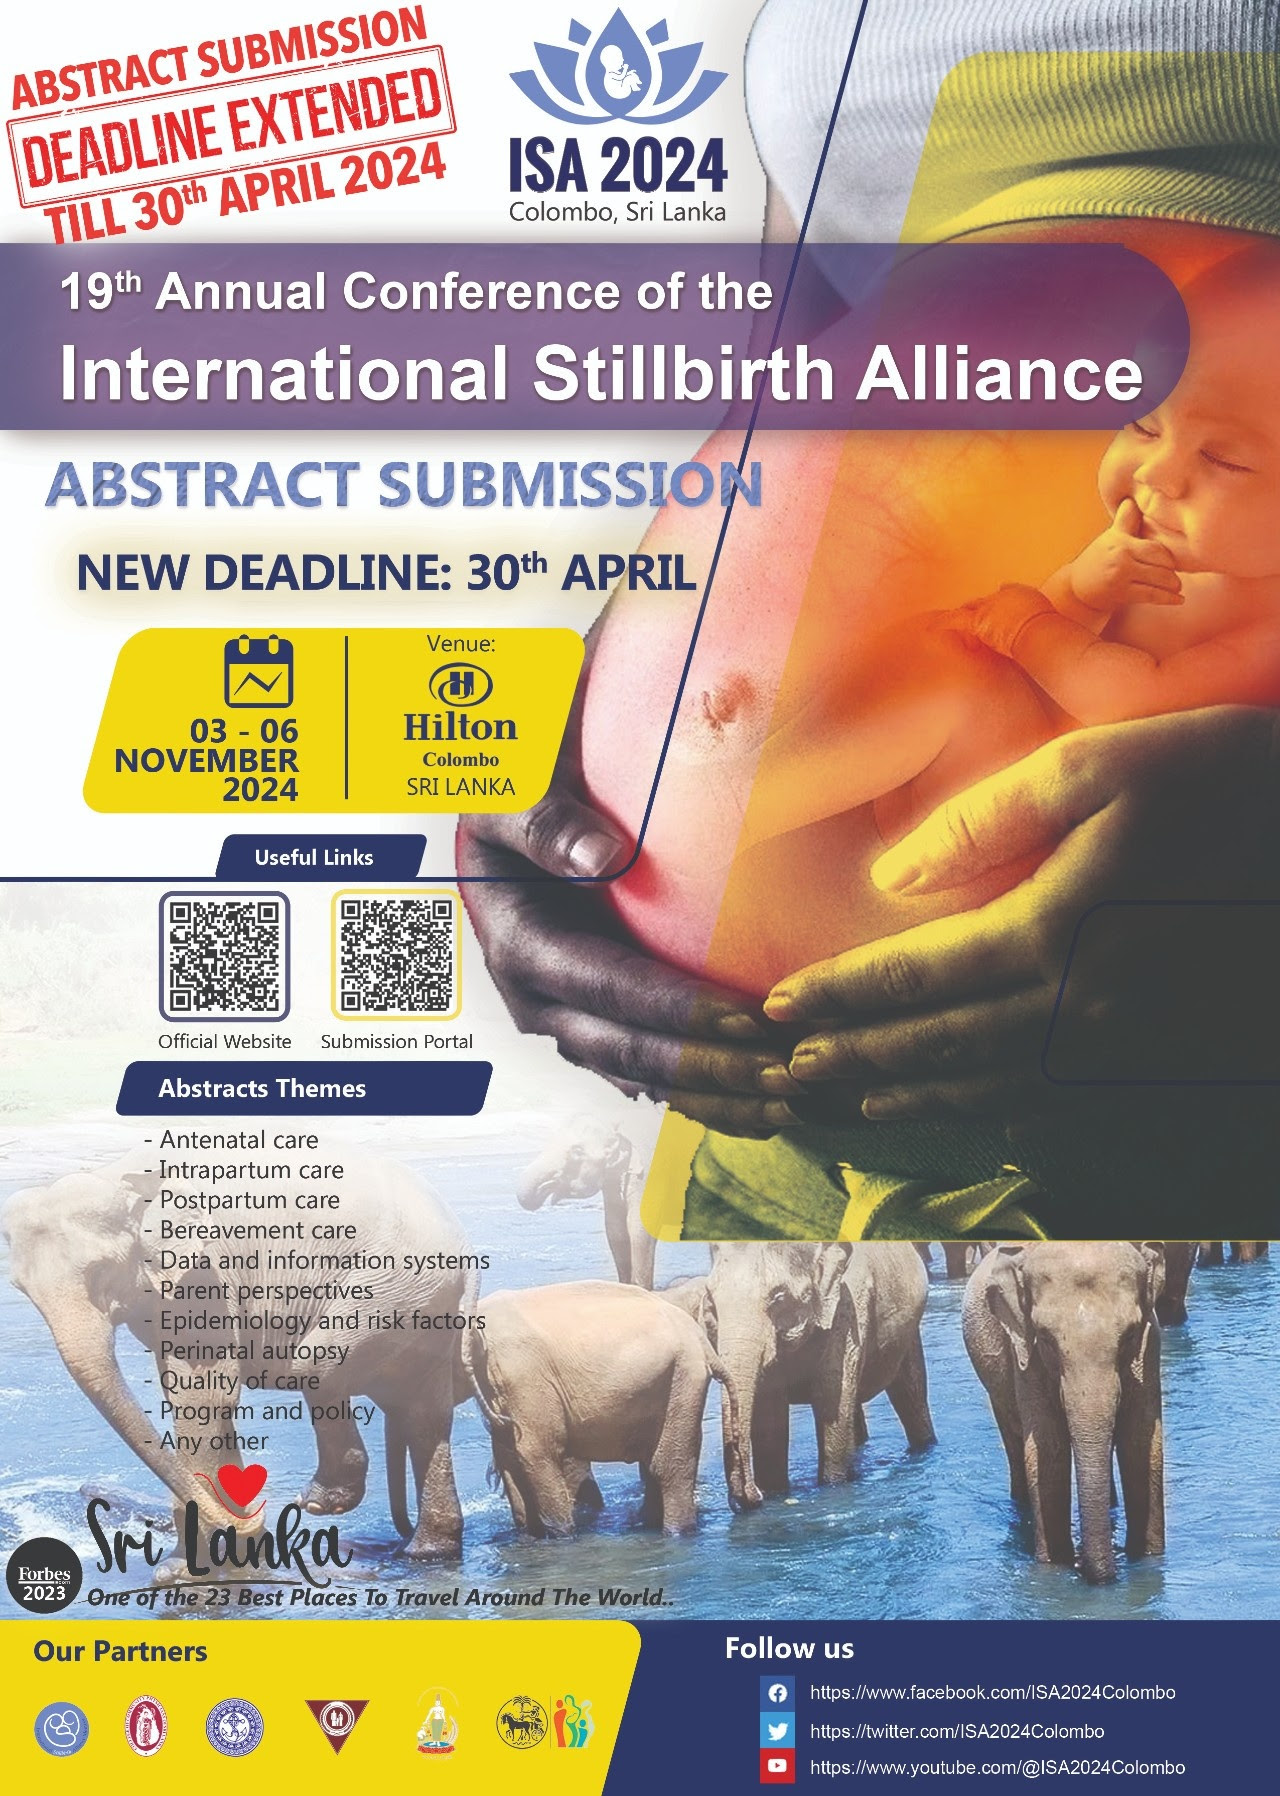 ISA 2024 Call for abstract submission. Scan the QR code for details.